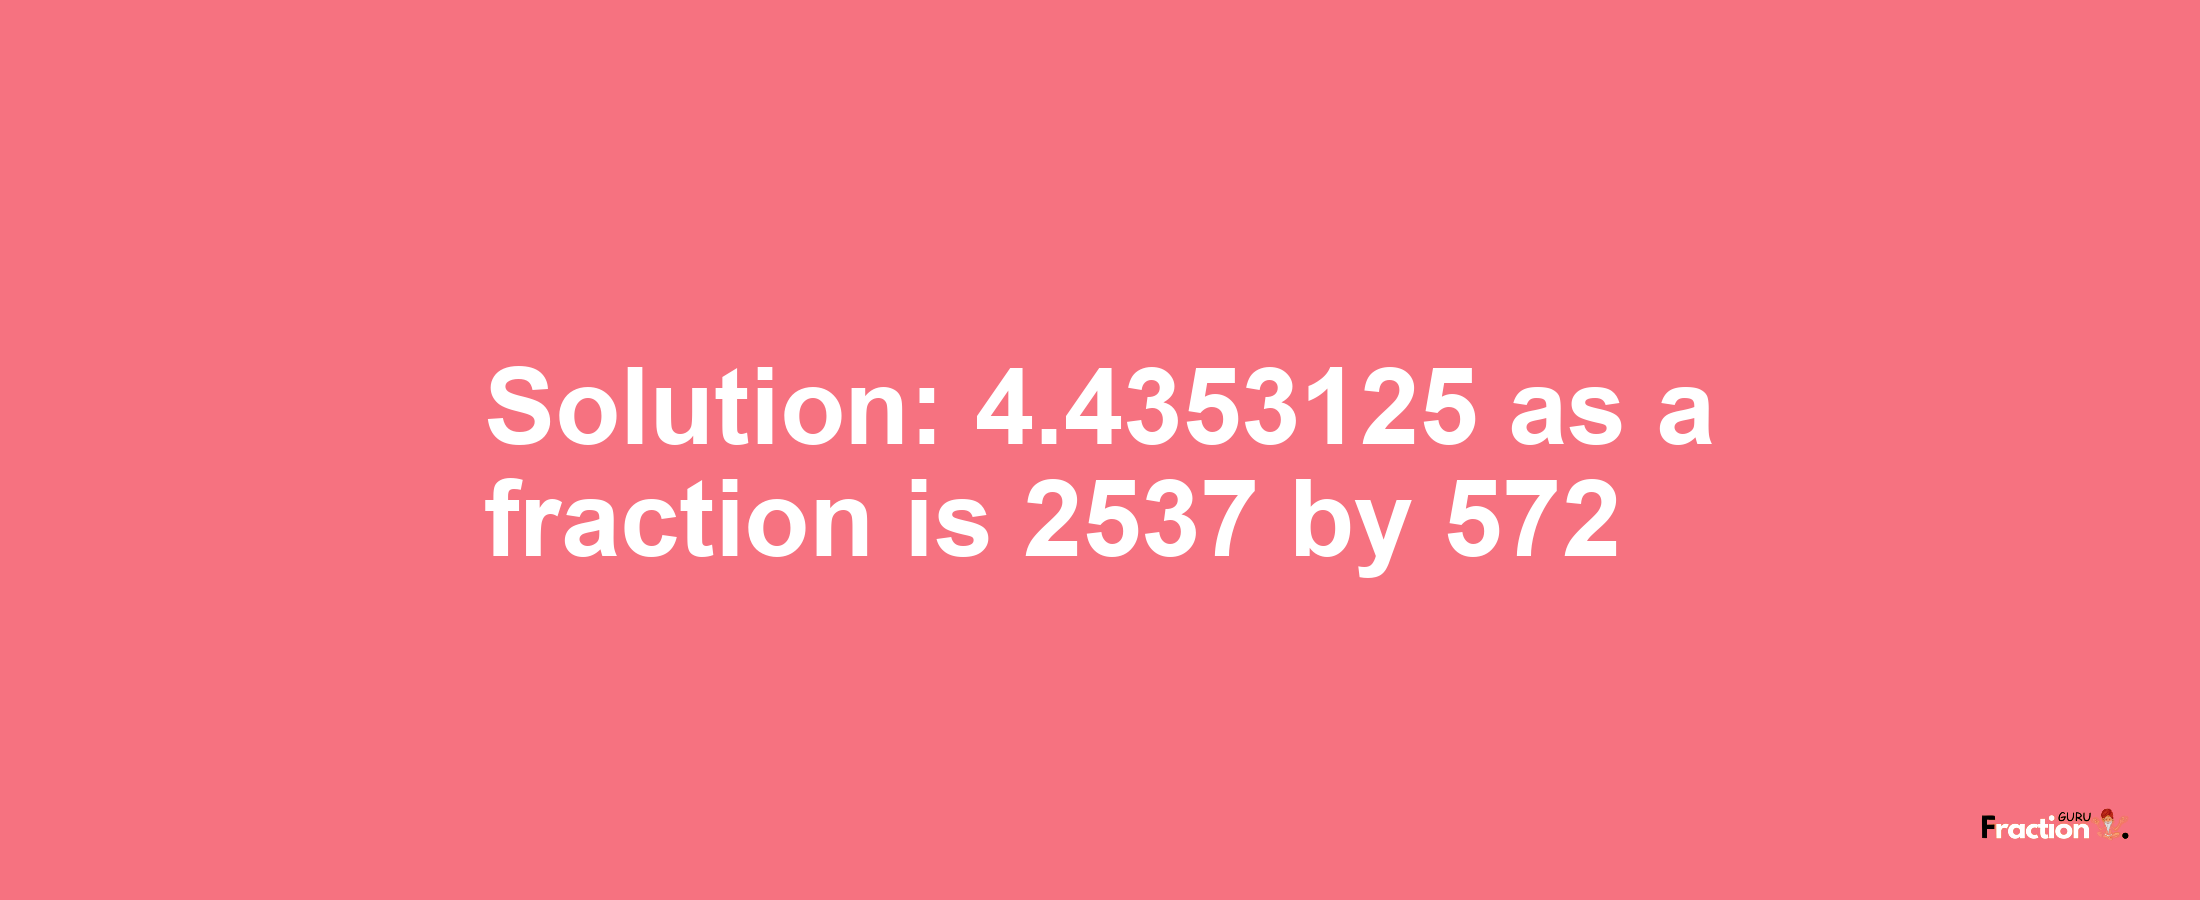 Solution:4.4353125 as a fraction is 2537/572